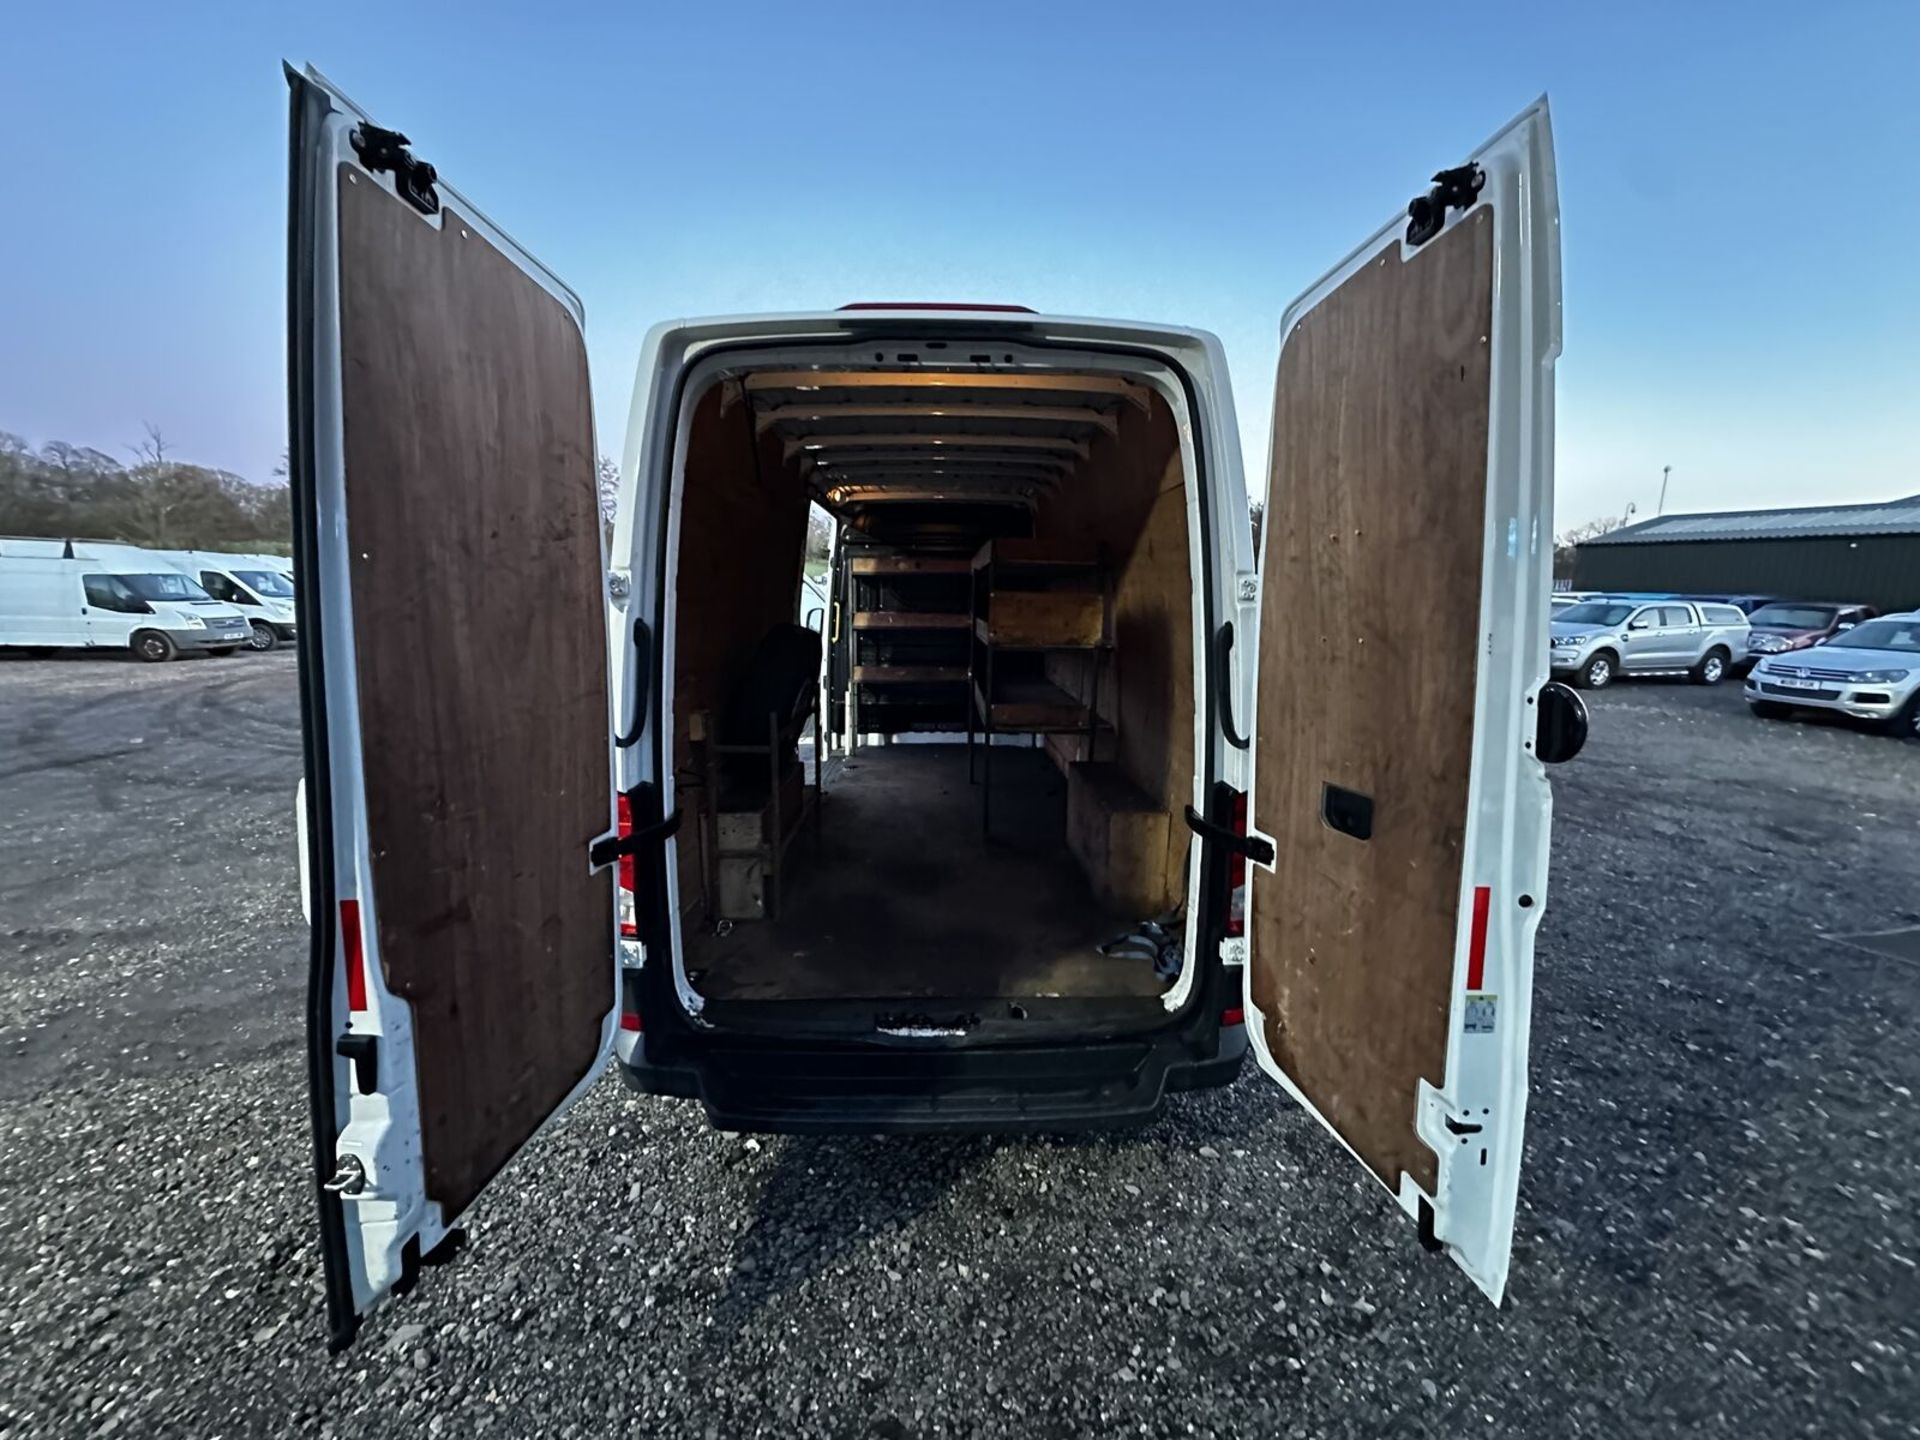 CLEAR AND CAPABLE: VOLKSWAGEN CRAFTER CR35 STARTLINE 2.0 TDI PANEL VAN - Image 5 of 14